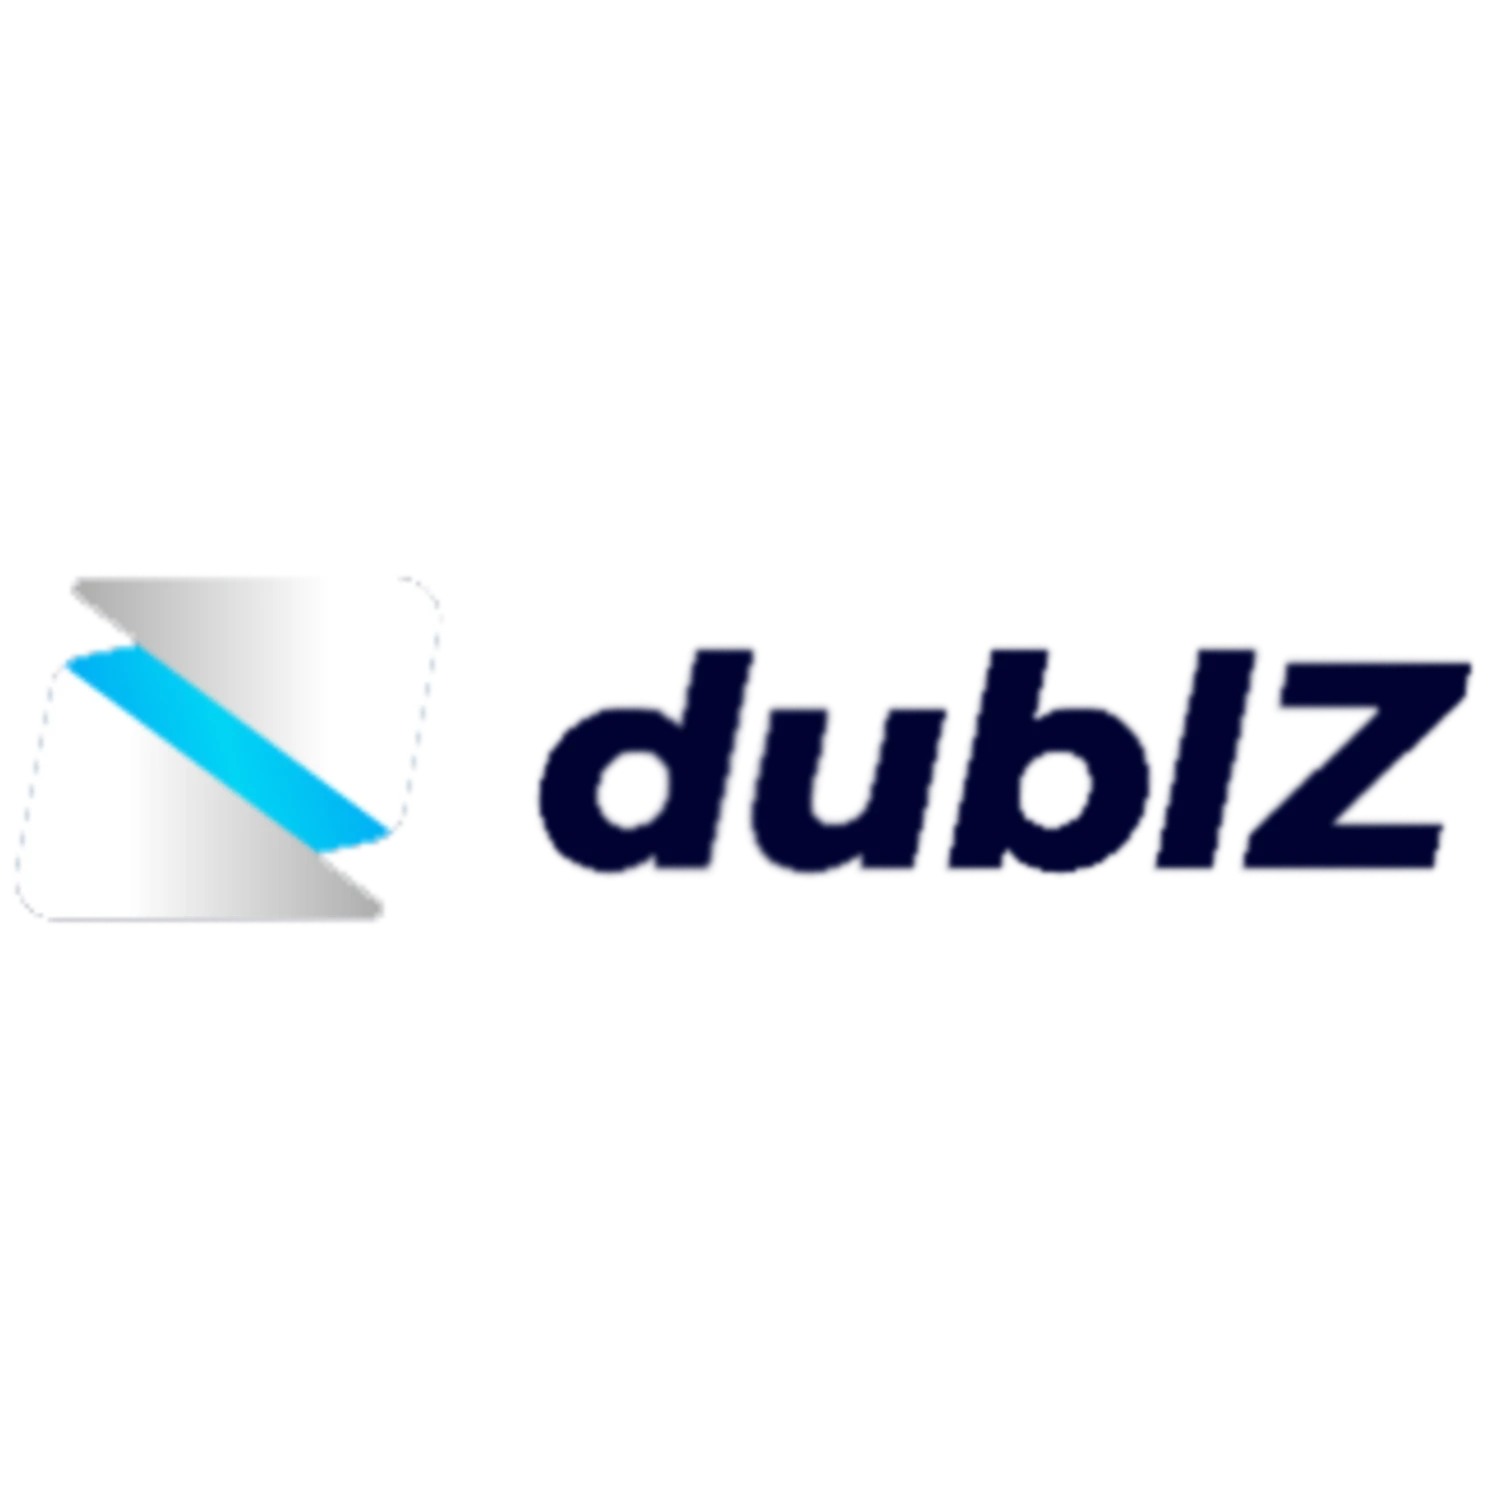 Play casino and bet on cricket with Dublz.